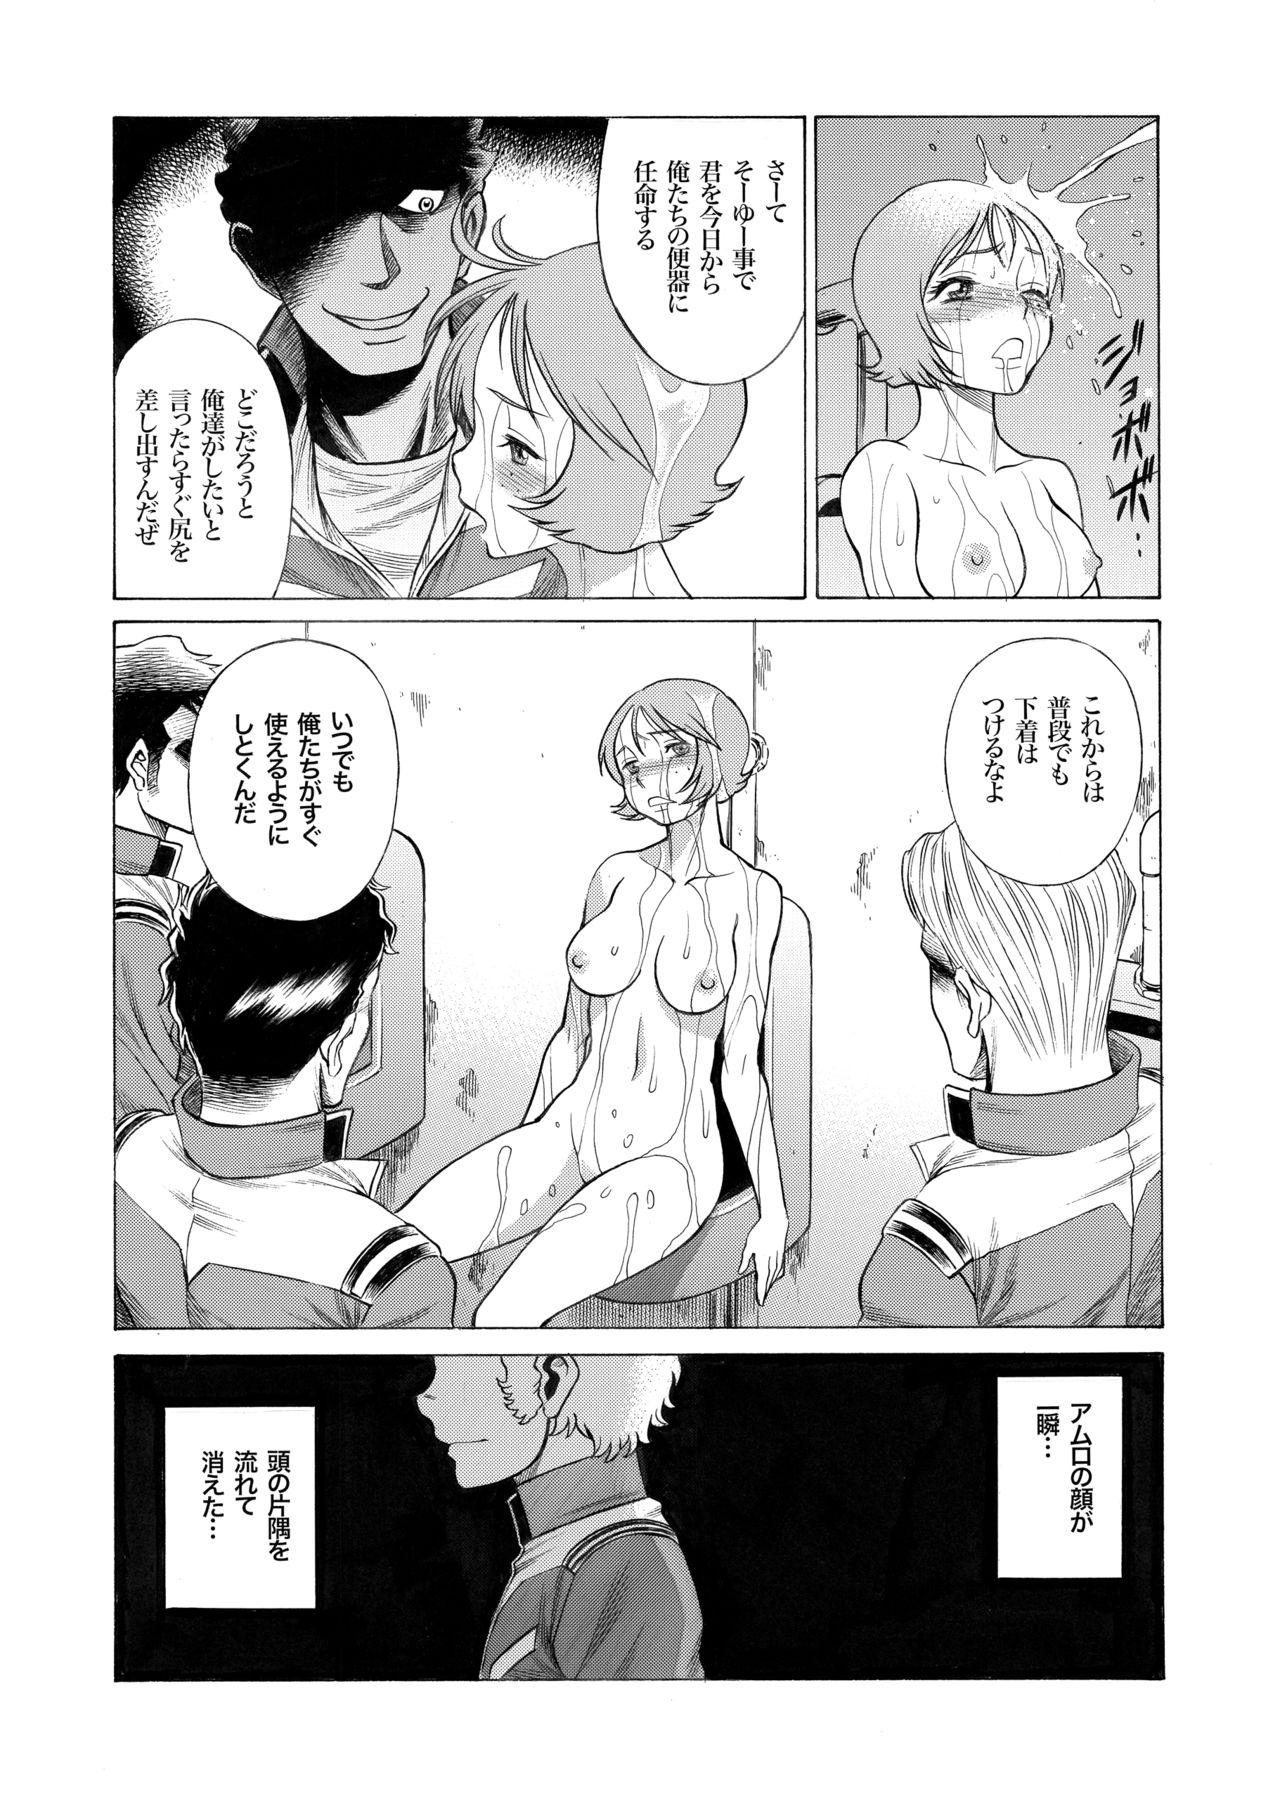 Pack Reijoh - Mobile suit gundam Gayemo - Page 7